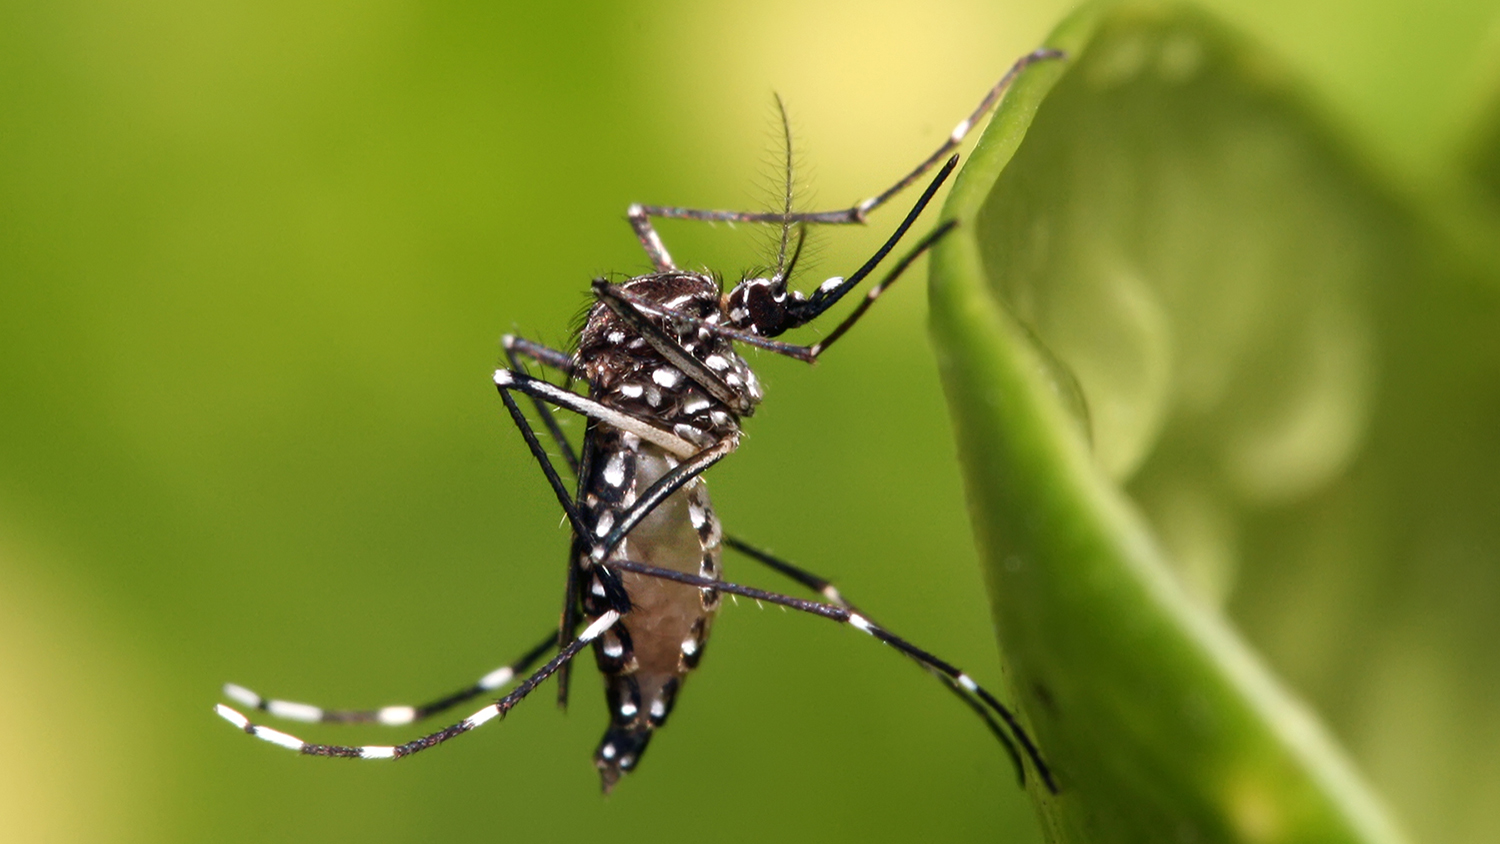 A close-up of a Aedes aegypti mosquito.